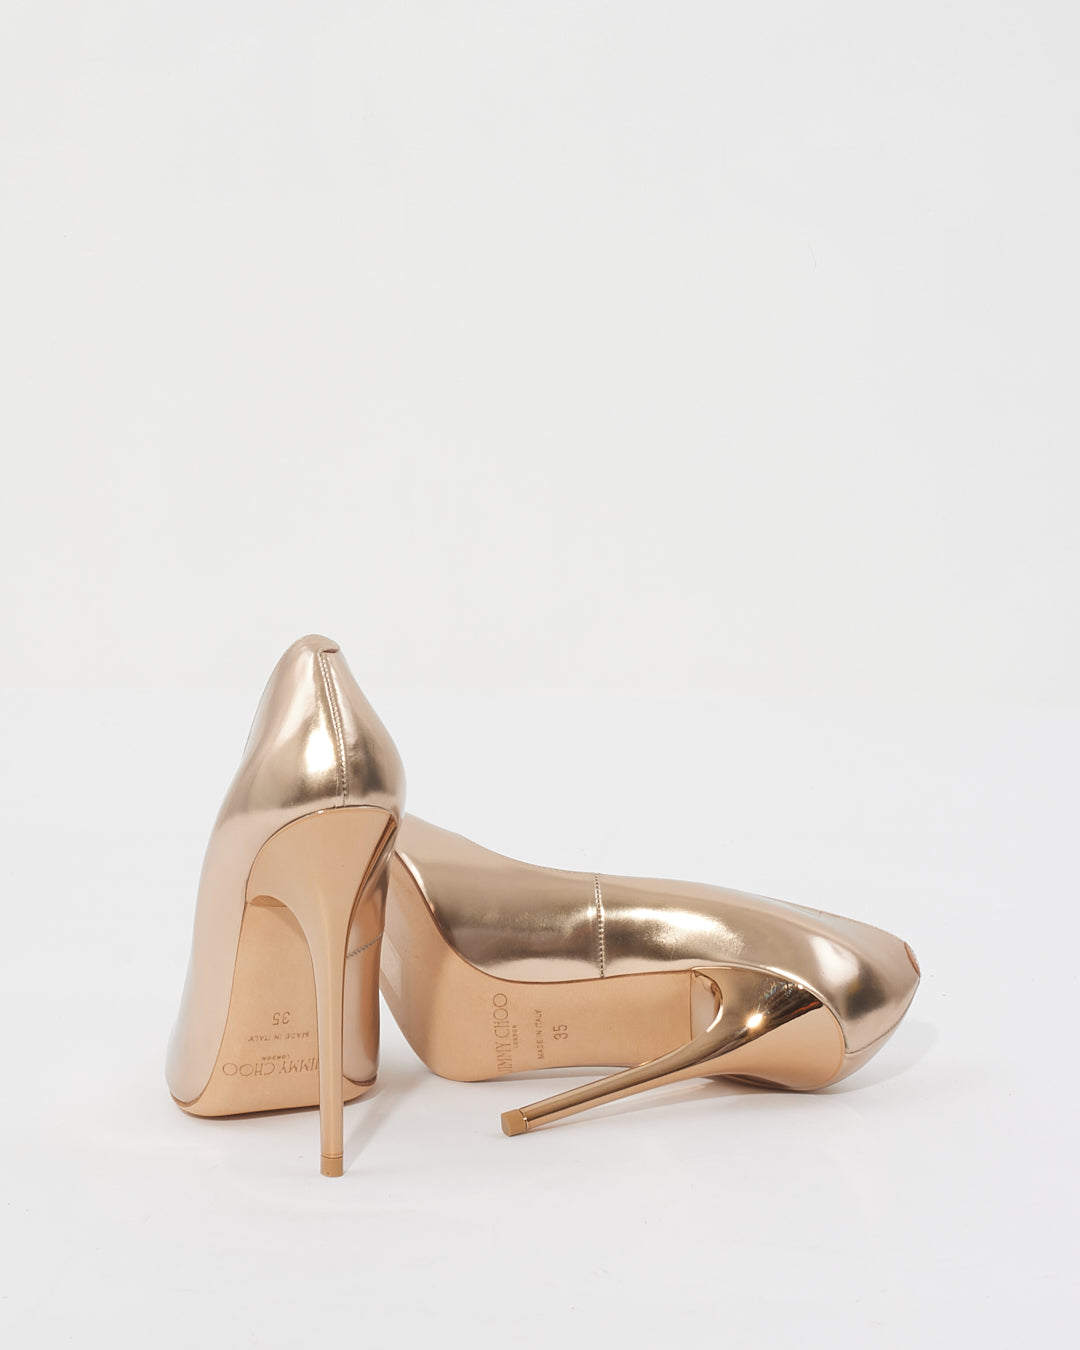 Jimmy Choo Gold Anouk Pointed Toe Pumps - 35